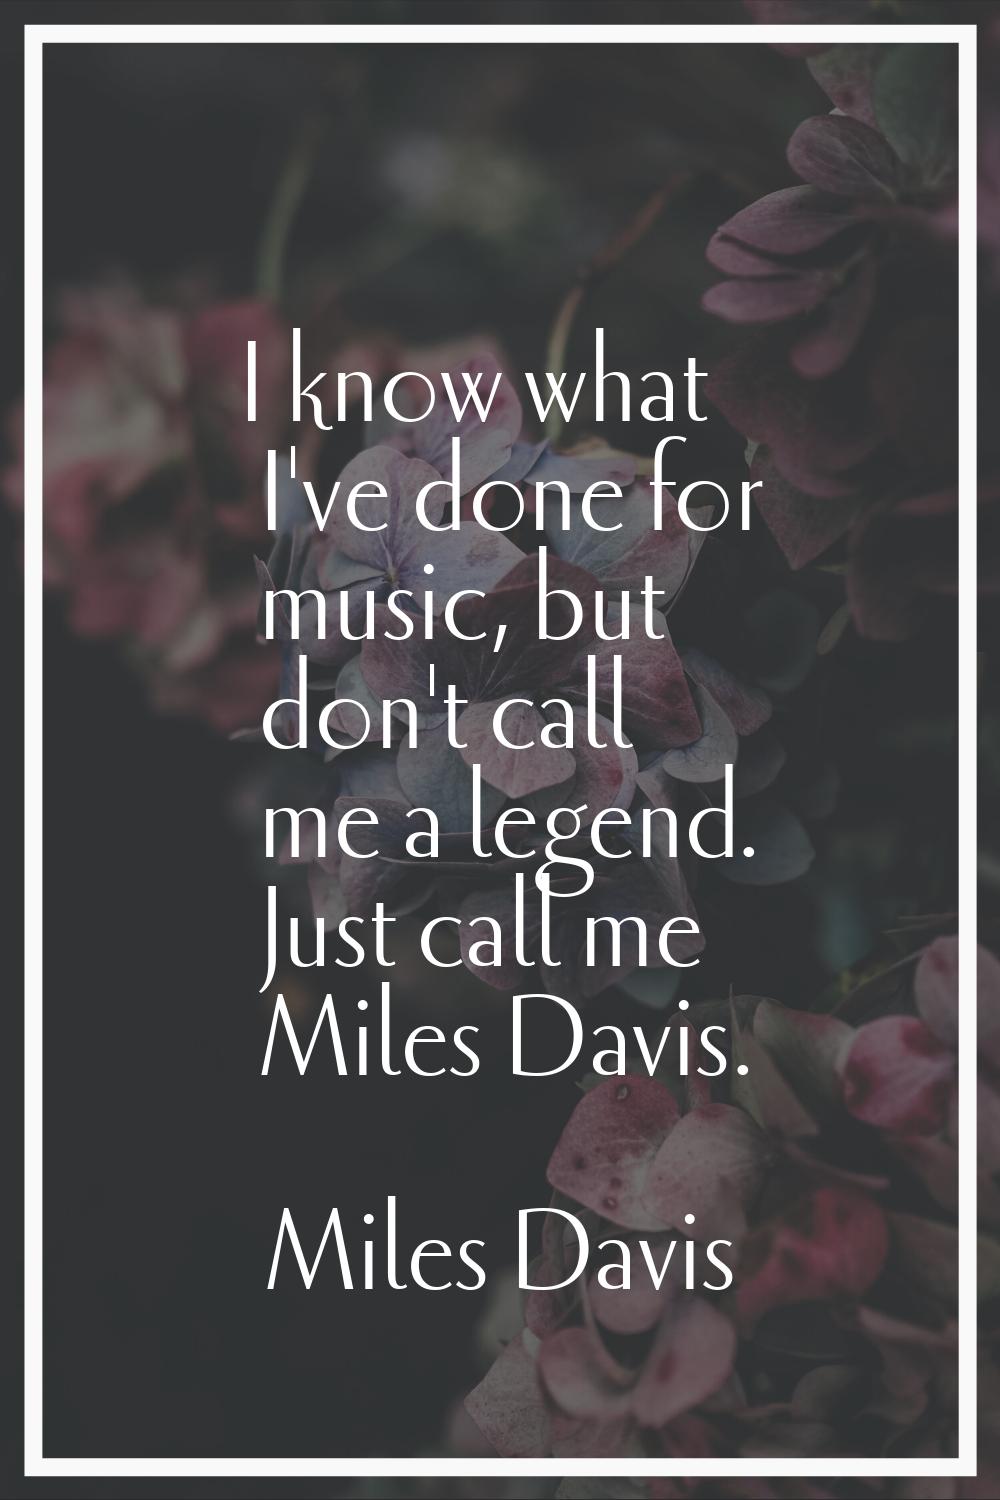 I know what I've done for music, but don't call me a legend. Just call me Miles Davis.